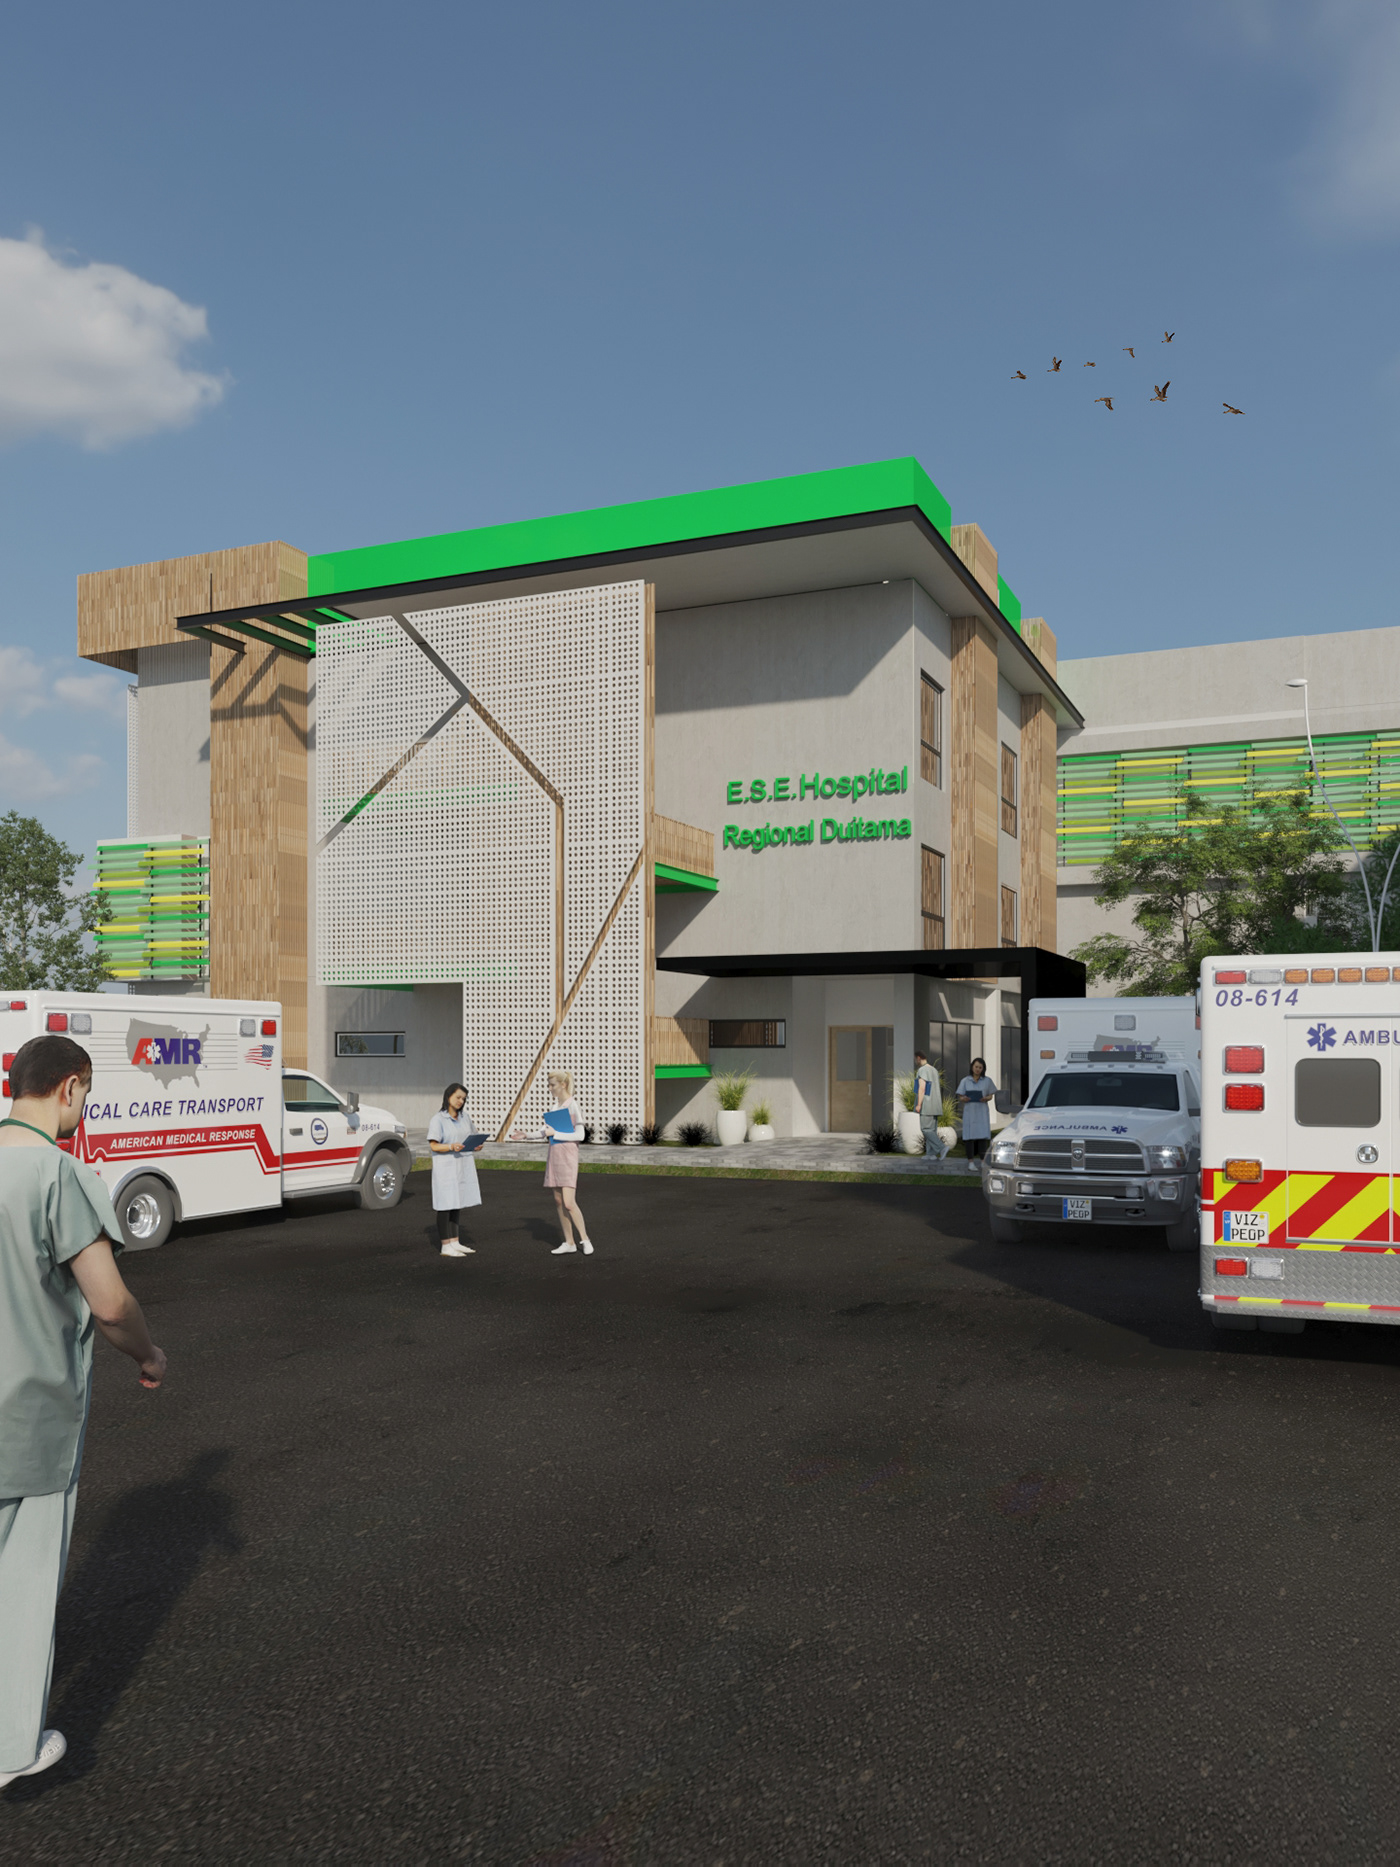 3ds max architecture design healthcare hospital Render vray